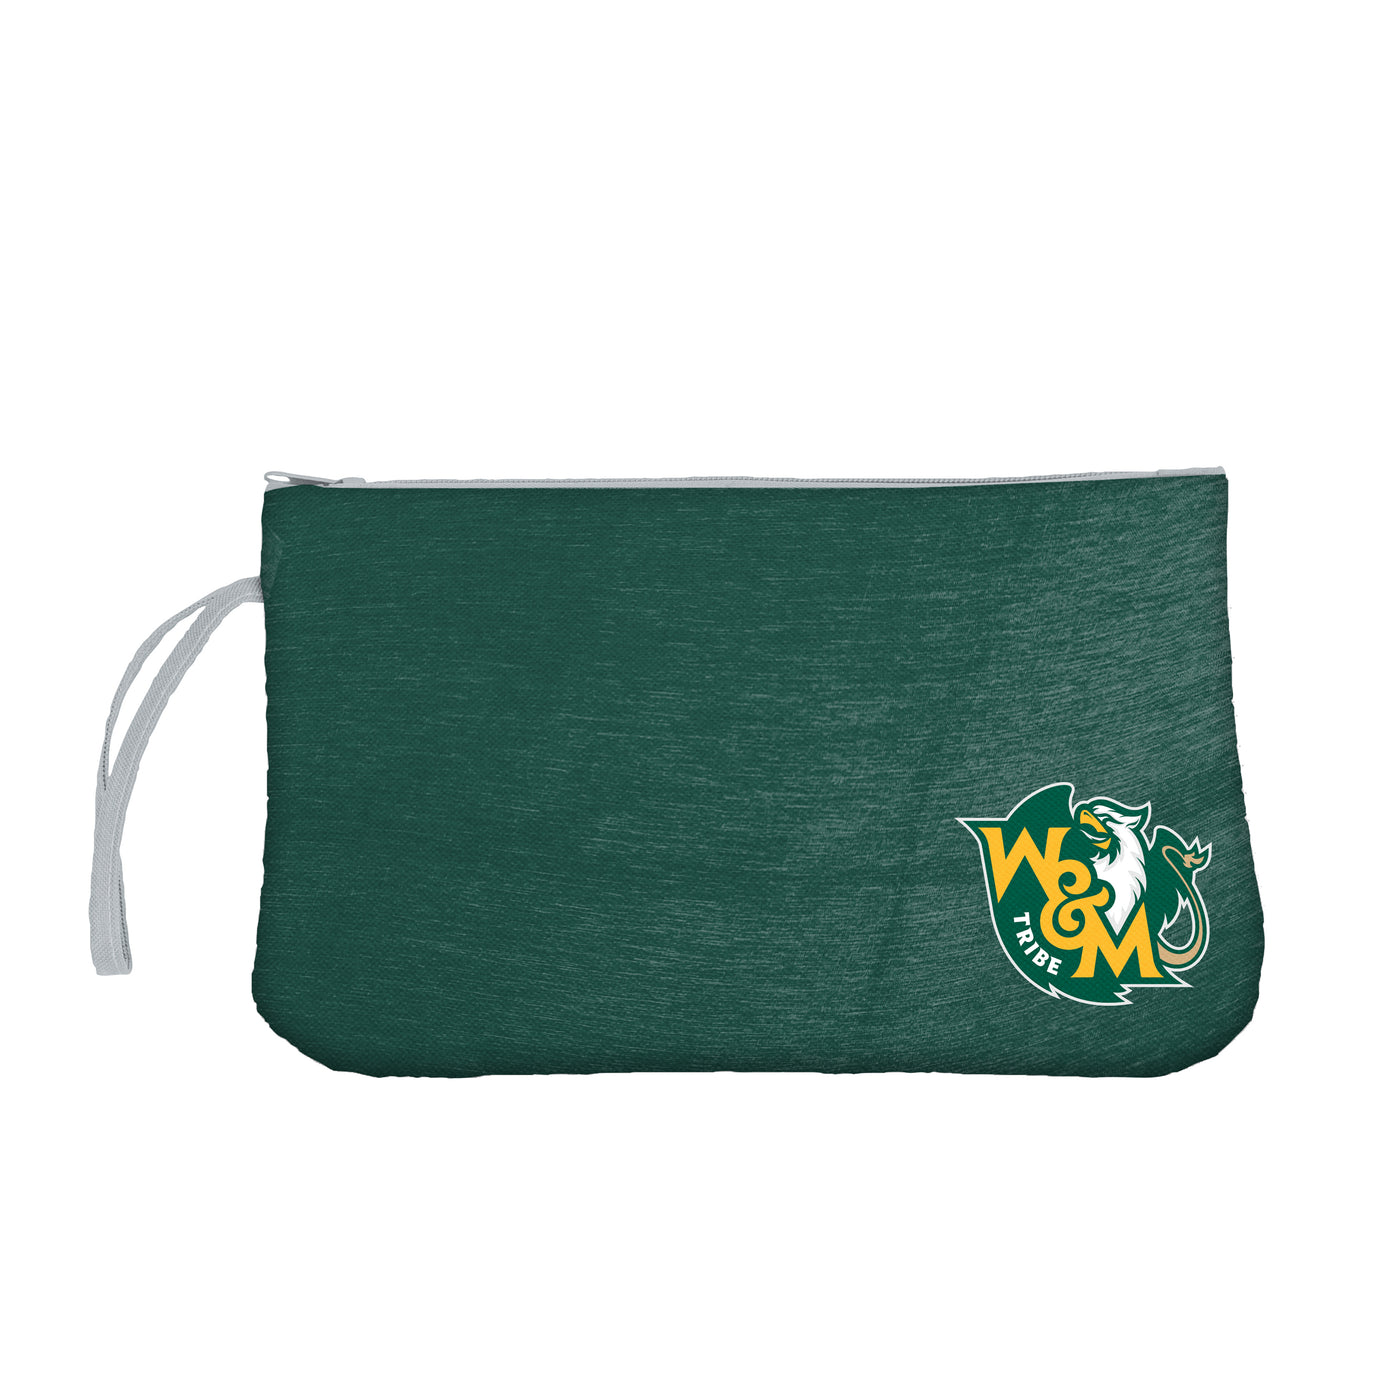 William and Mary Hunter Wristlet